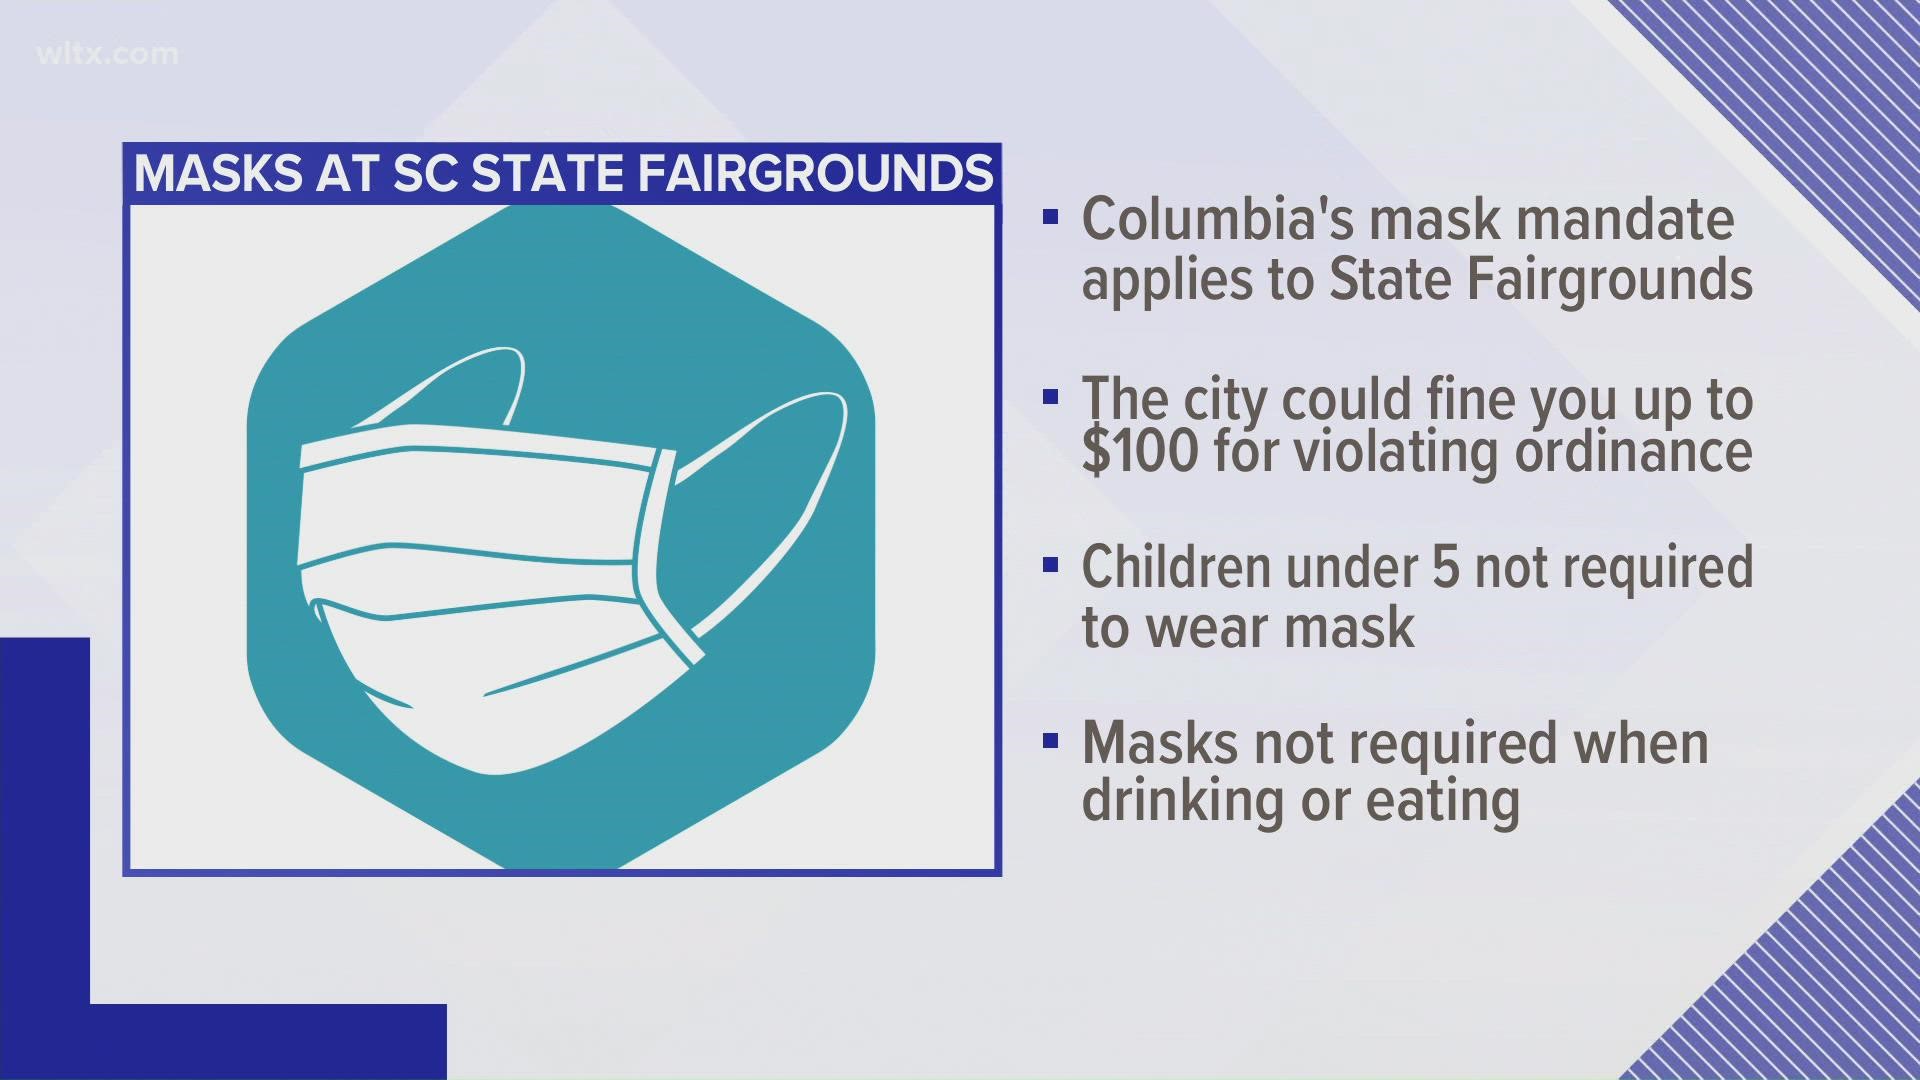 People who park or tailgate at the State Fairgrounds  must wear a mask when social distancing is not possible. If you don't, you could be fined up to $100.